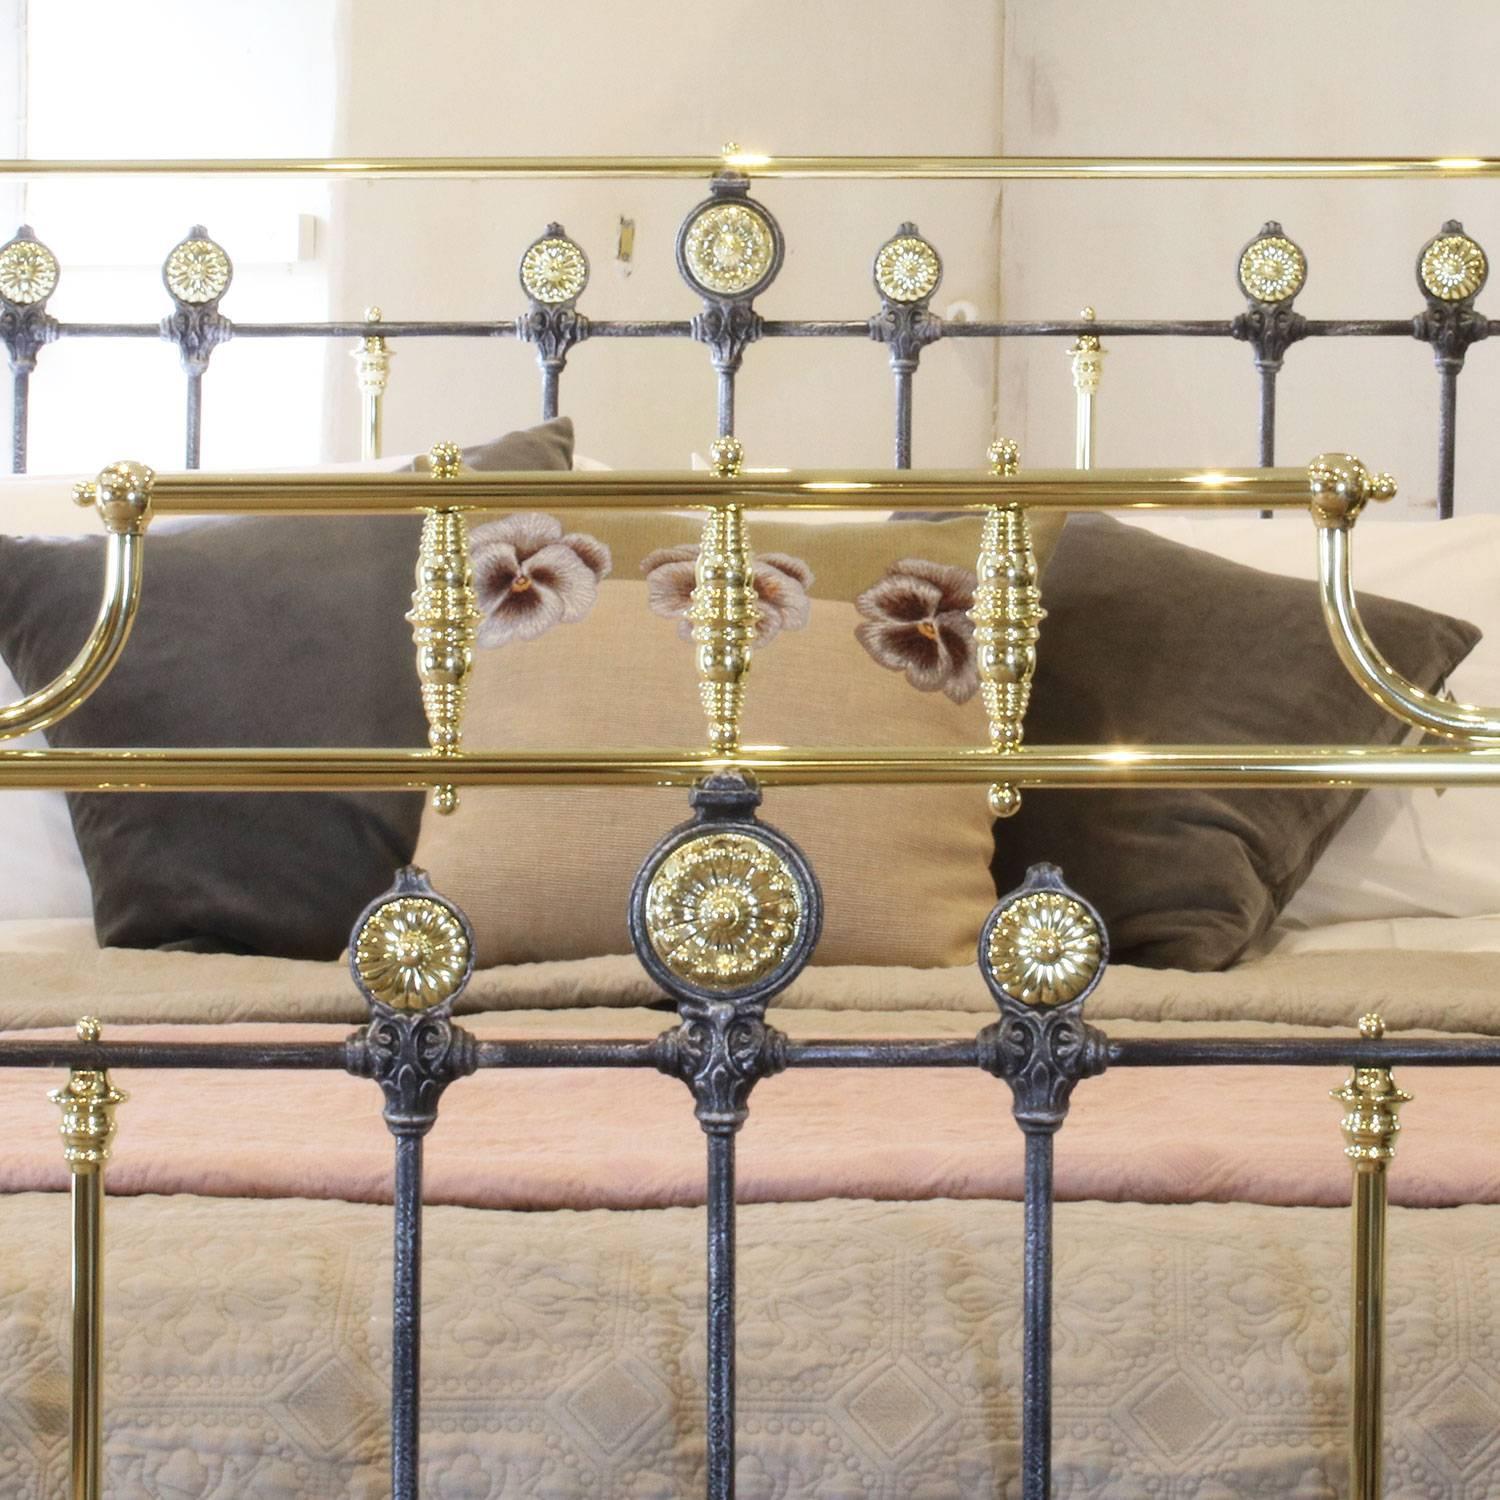 Victorian Brass and Iron Decorative Bedstead in Charcoal, MK134